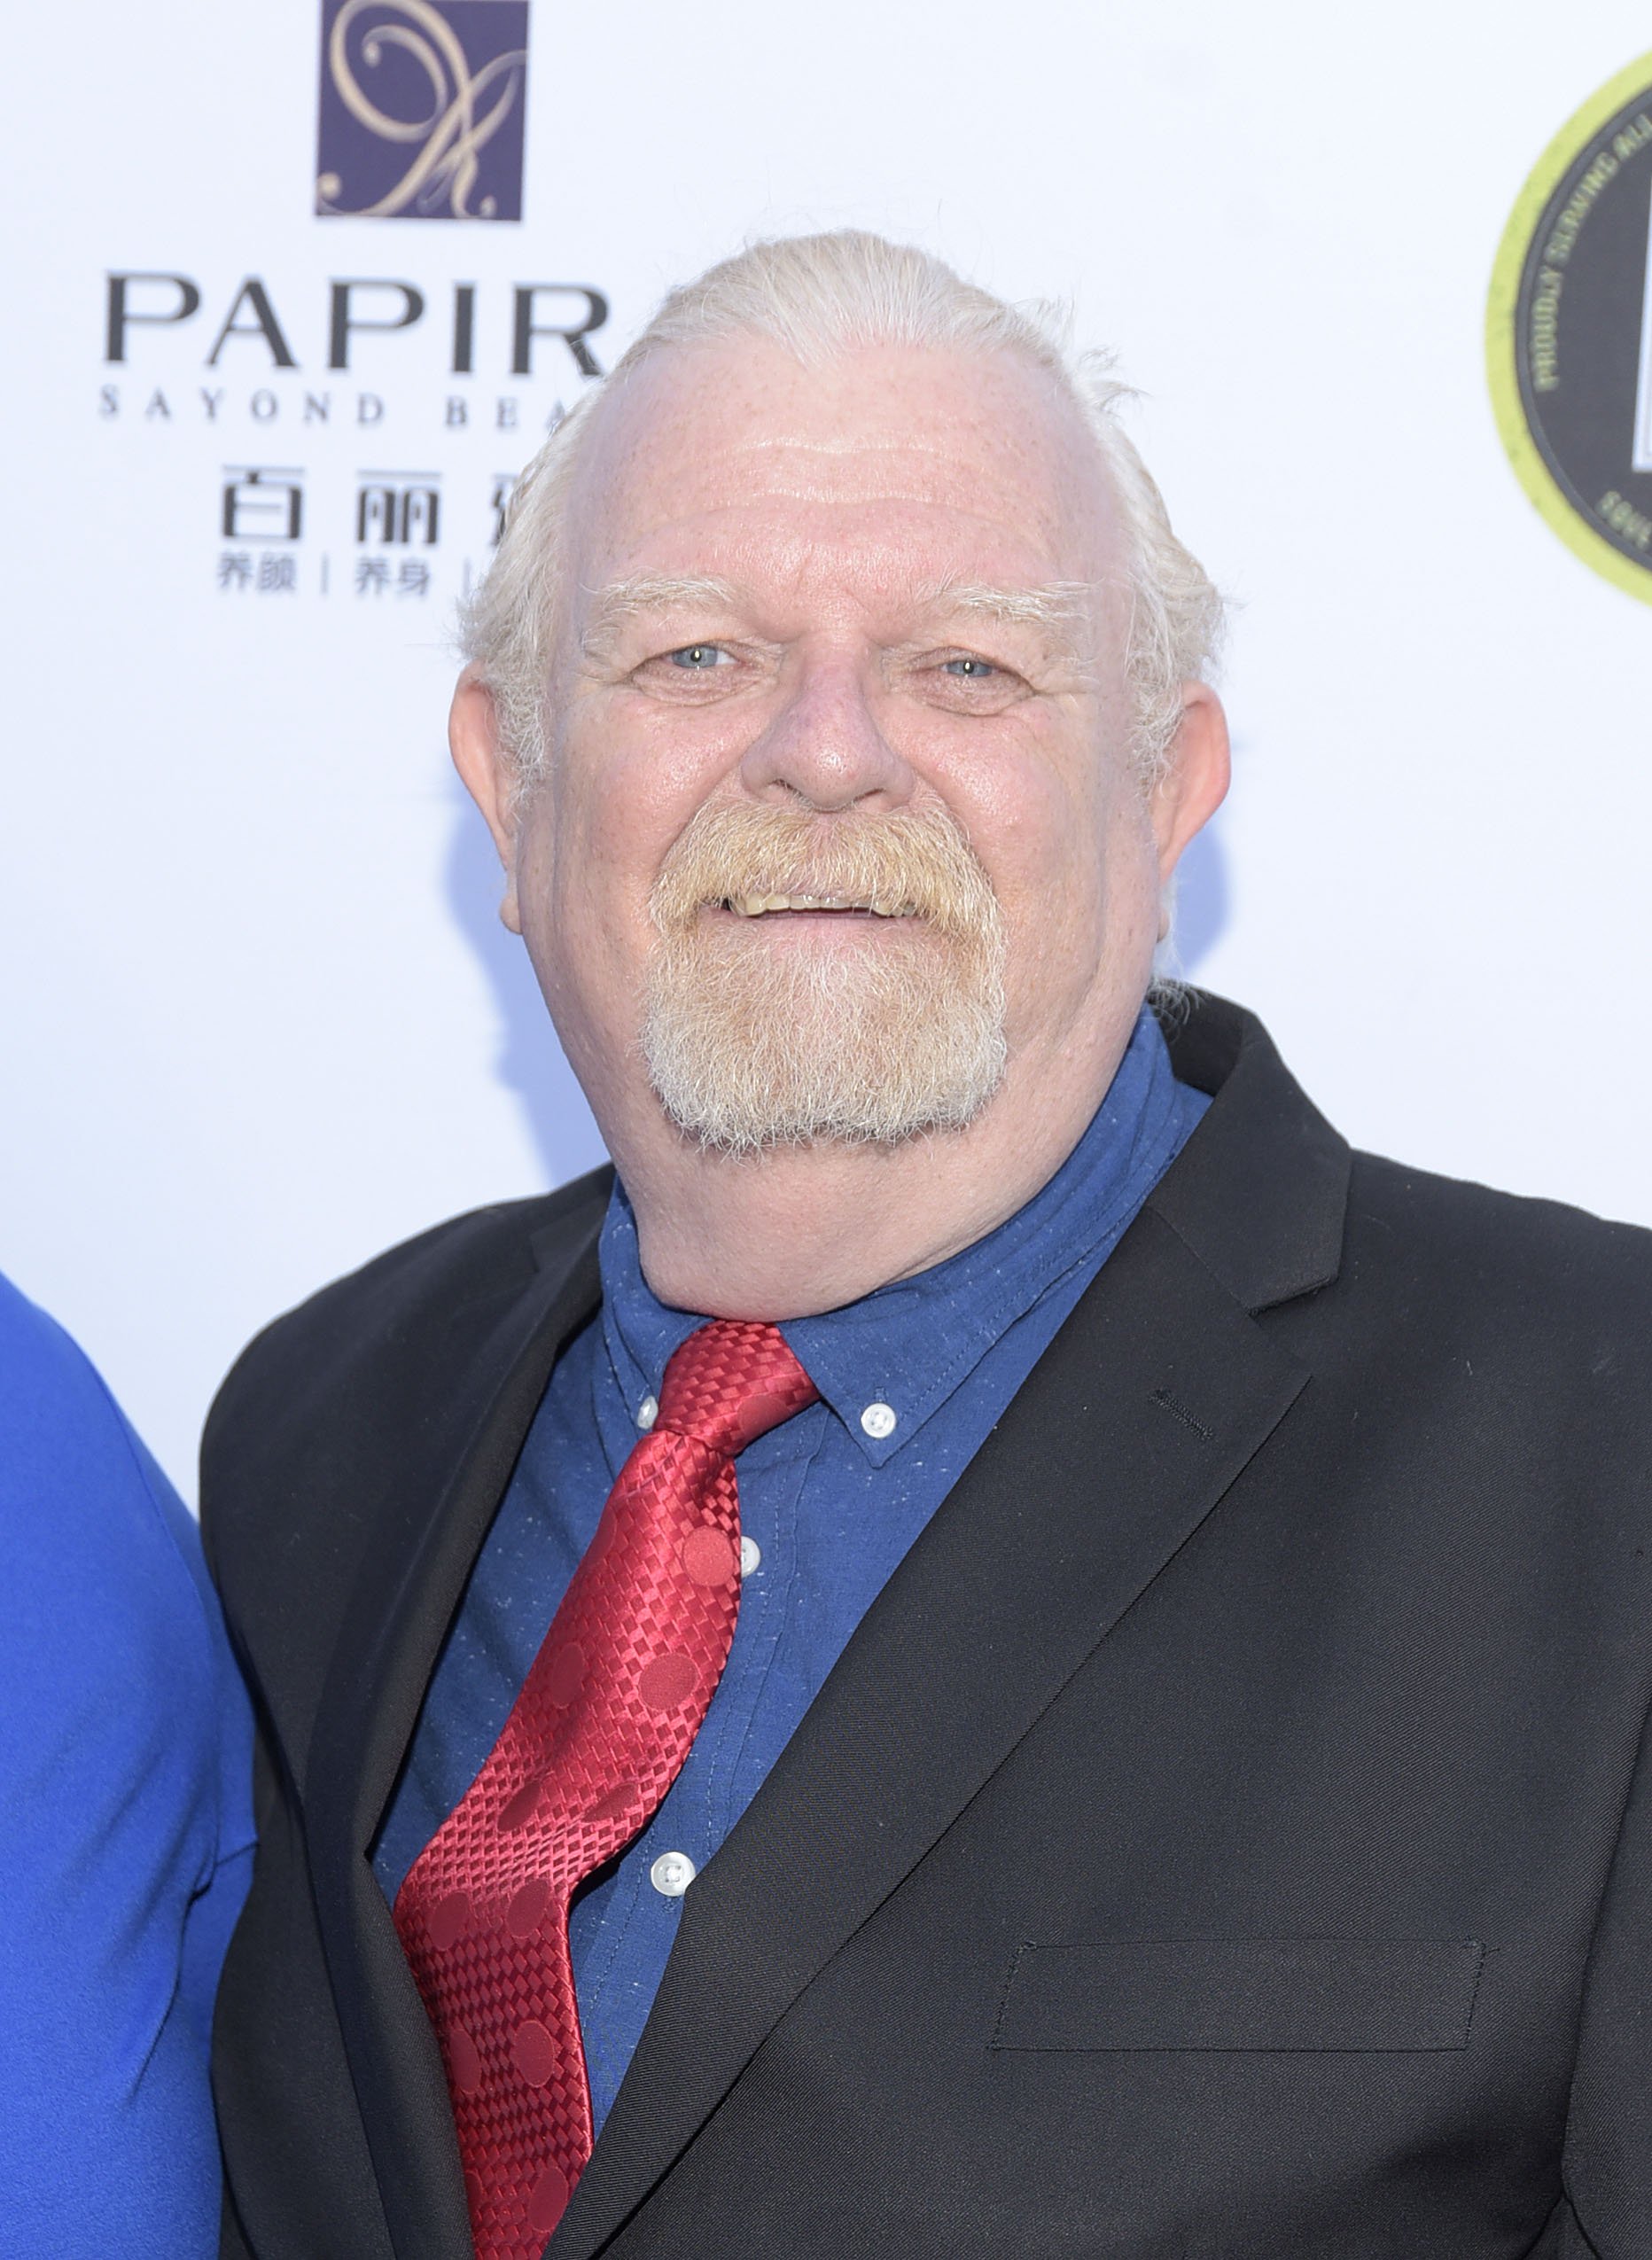 Johnny Whitaker at the 4th annual Roger Neal Oscar Viewing Dinner Icon Awards on February 24, 2019 | Photo: GettyImages